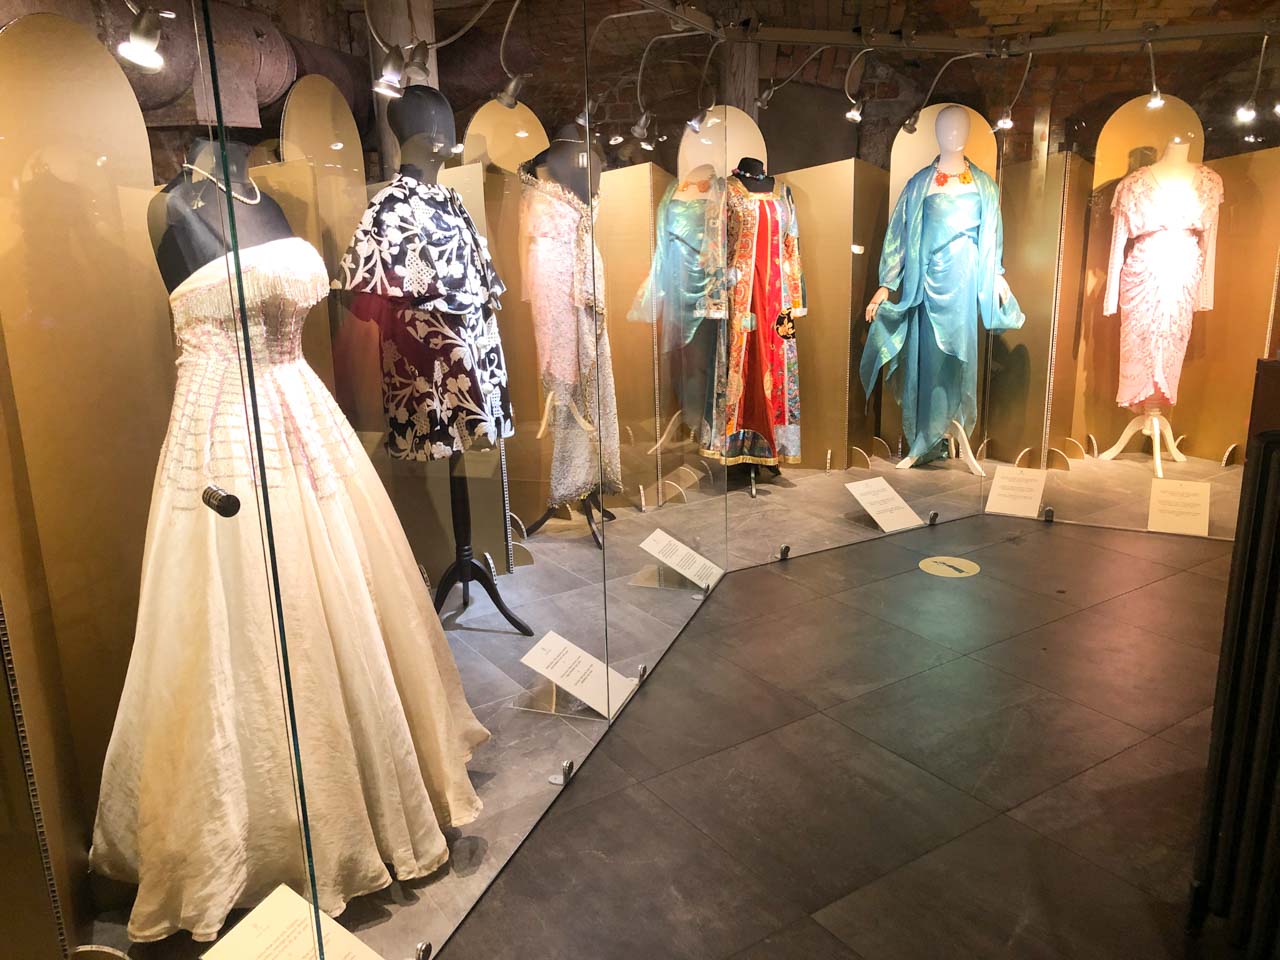 Dresses on display at the Fashion Museum in Riga